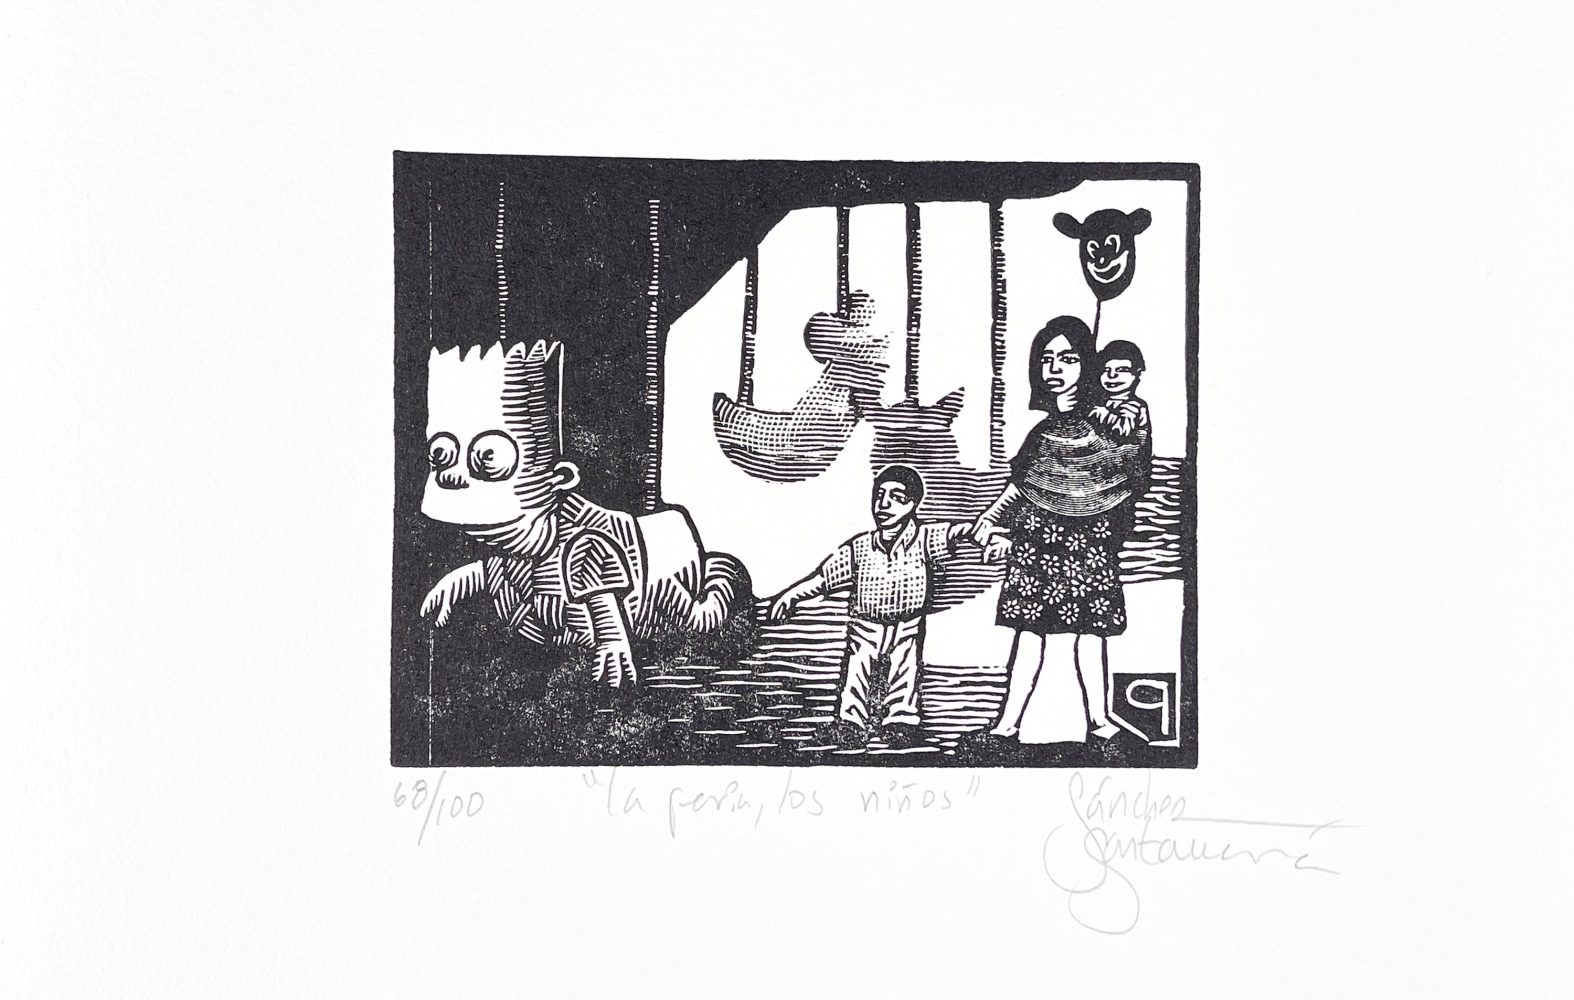 &amp;ldquo;Los Chinelos&amp;rdquo; Carpeta de 11 Linoleos
[MEXICO - MEXICAN AMERICANS] Sanchez Santamaria, Sergio ; F Ruben Montero Soto,&amp;nbsp;[2003]

Eleven linoleum block prints in the style of the Taller Gr&amp;aacute;fica Popular.
1 portfolio ([3] leaves, 11 unnumbered leaves of plates) : chiefly illustrations ; 12.5&amp;quot;
Limited edition of 100 copies, each plate is signed and numbered by the artist
$950

Condition and provenance notes: An uncirculated copy of the work acquired from a source in Mexico City who is friends with the artist.

Published by Librer&amp;iacute;a M&amp;eacute;xico y lo Mexicano

INQUIRE